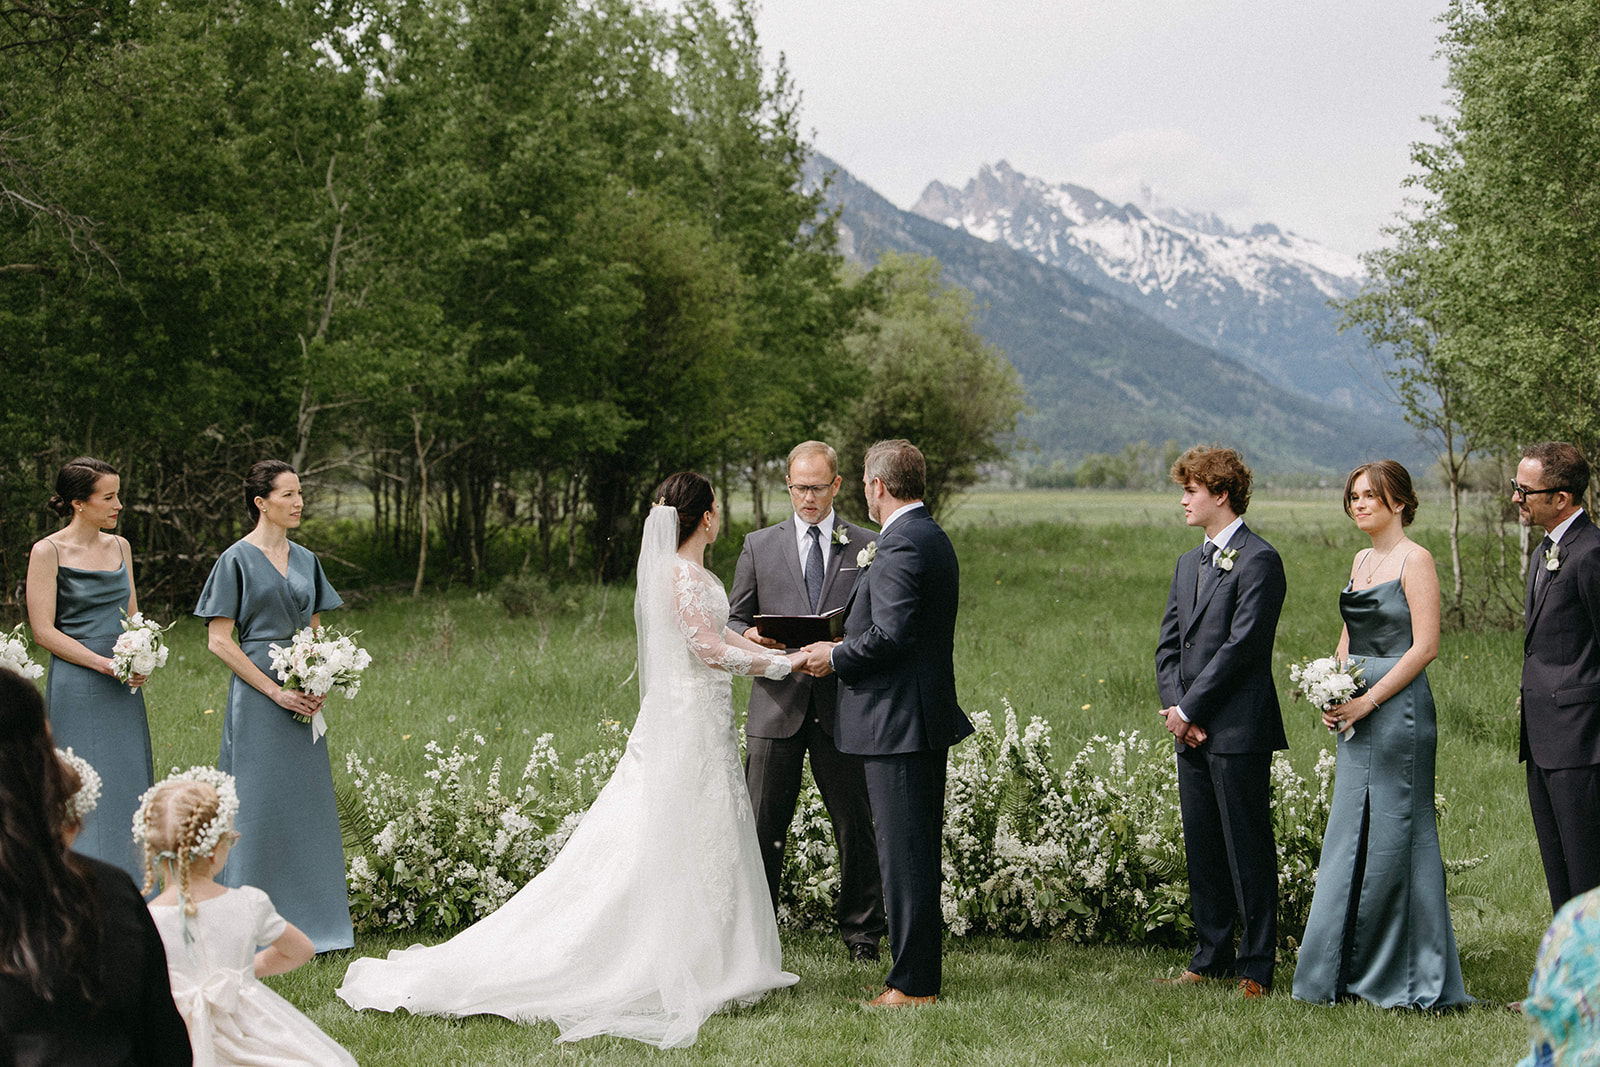  A bride and groom exchange wedding vows during an outdoor wedding ceremony on a luxury ranch in Wyoming. 
